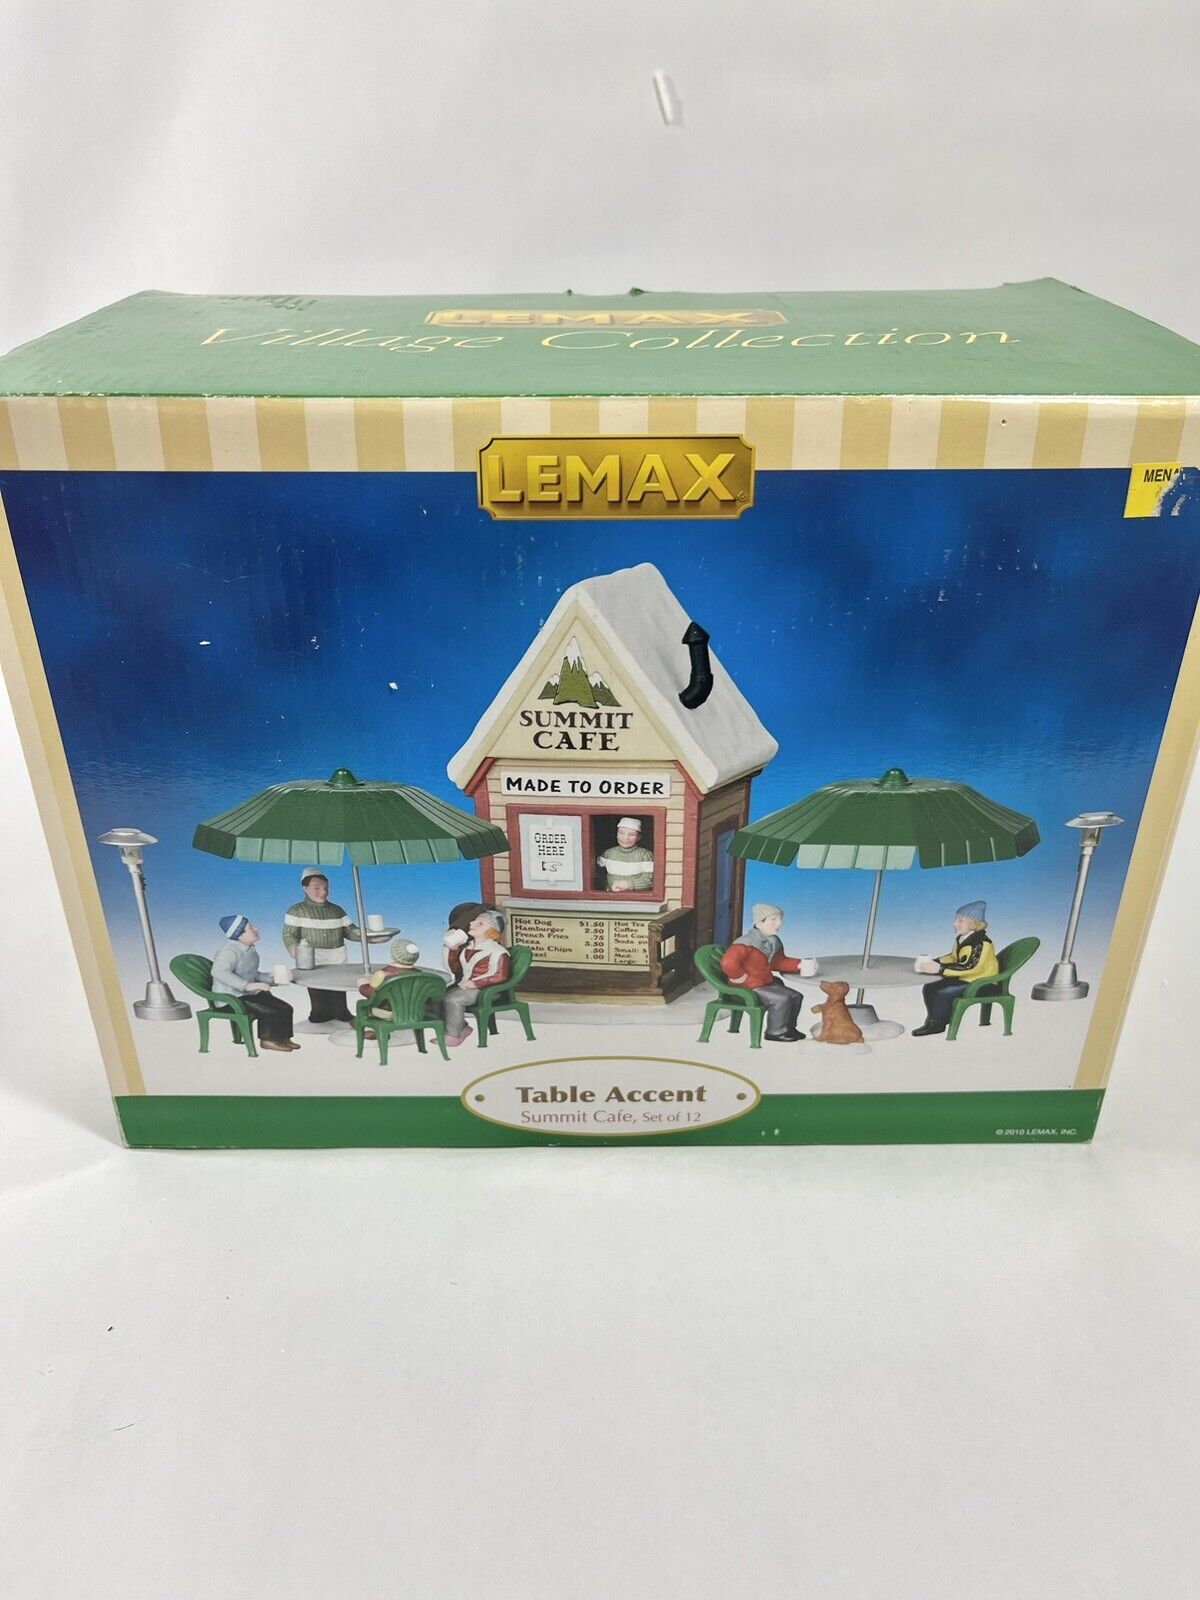 Summit Cafe 2010 Lemax Village Collection Table Accent *RETIRED* #289-0267